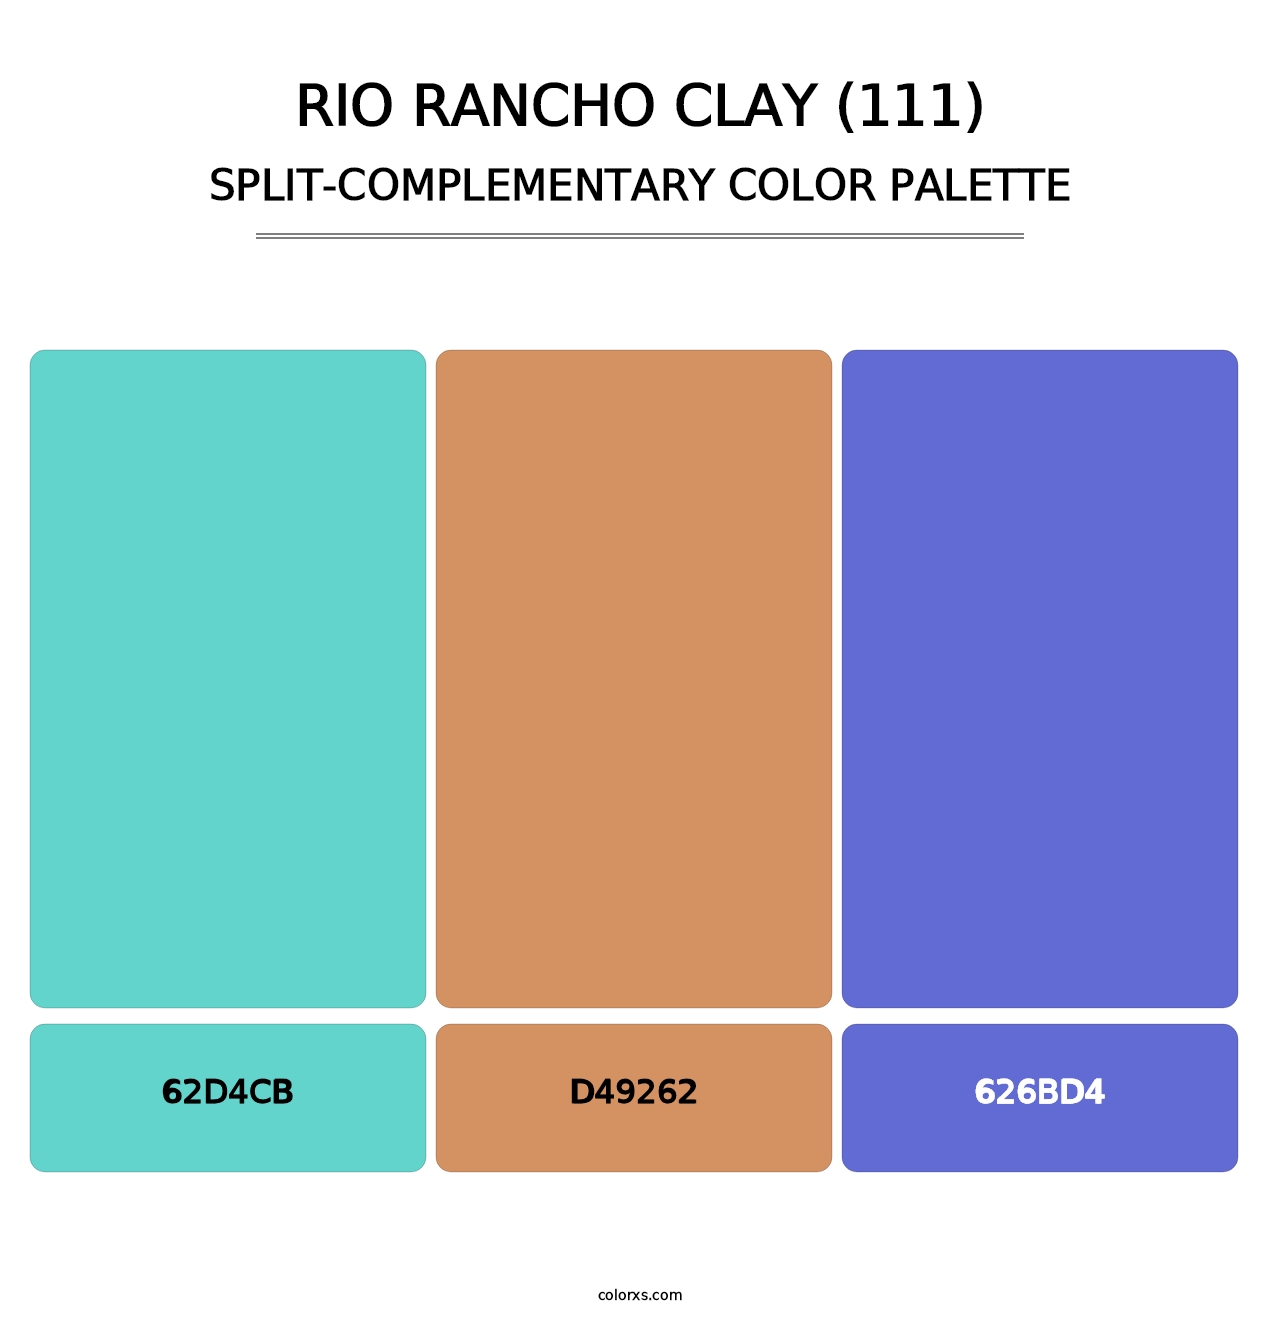 Rio Rancho Clay (111) - Split-Complementary Color Palette